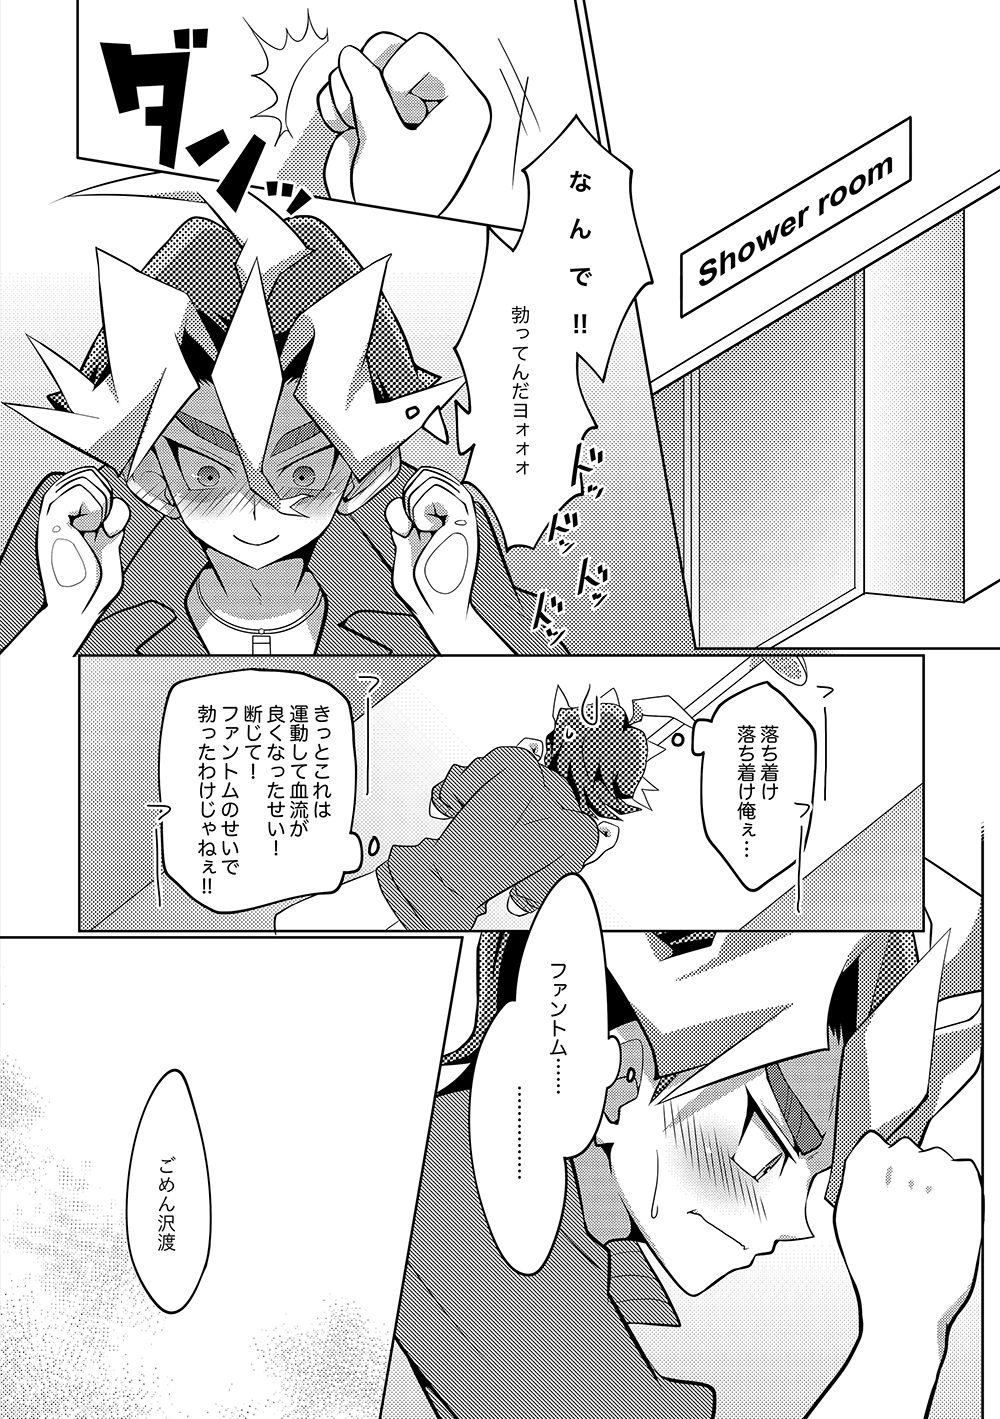 Tattooed SxS H! ANOTHER - Yu-gi-oh arc-v Letsdoeit - Page 7